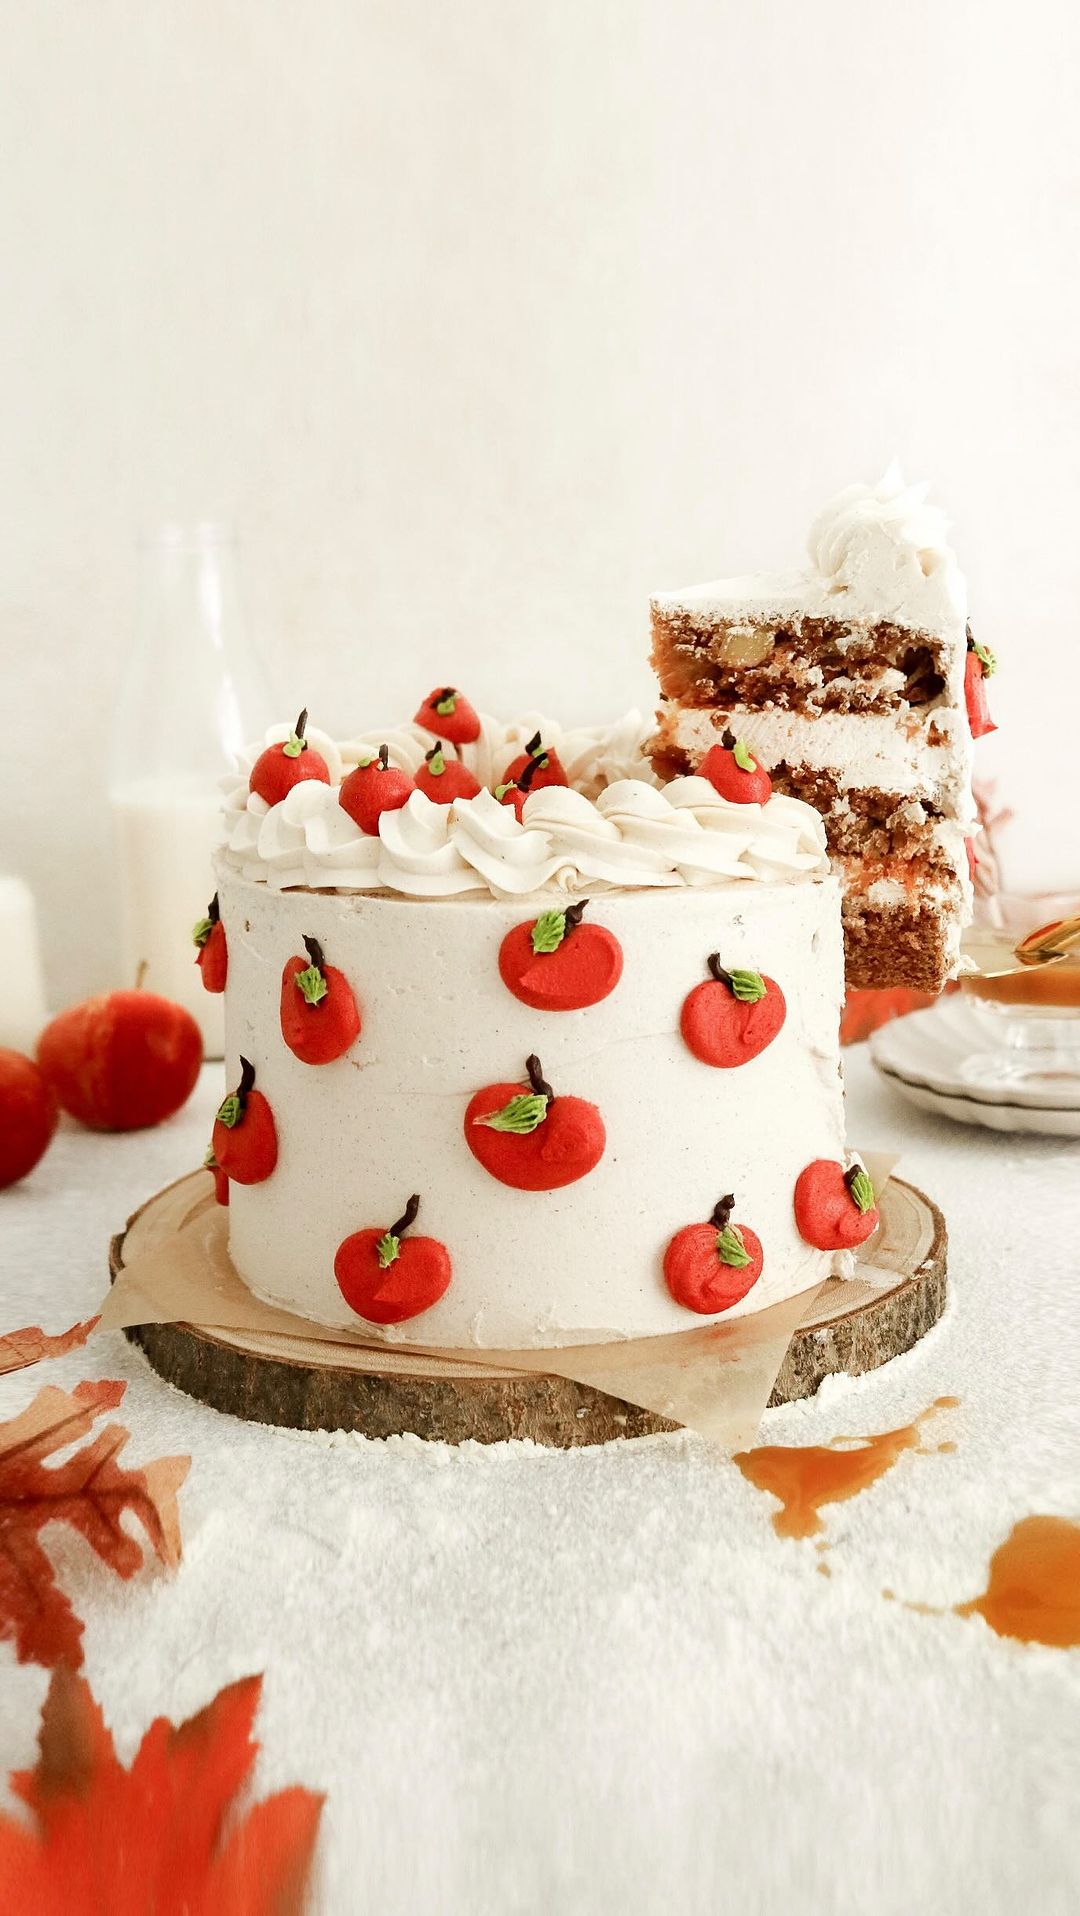 Vegan Apple and Cinnamon Layer Cake with Frosting